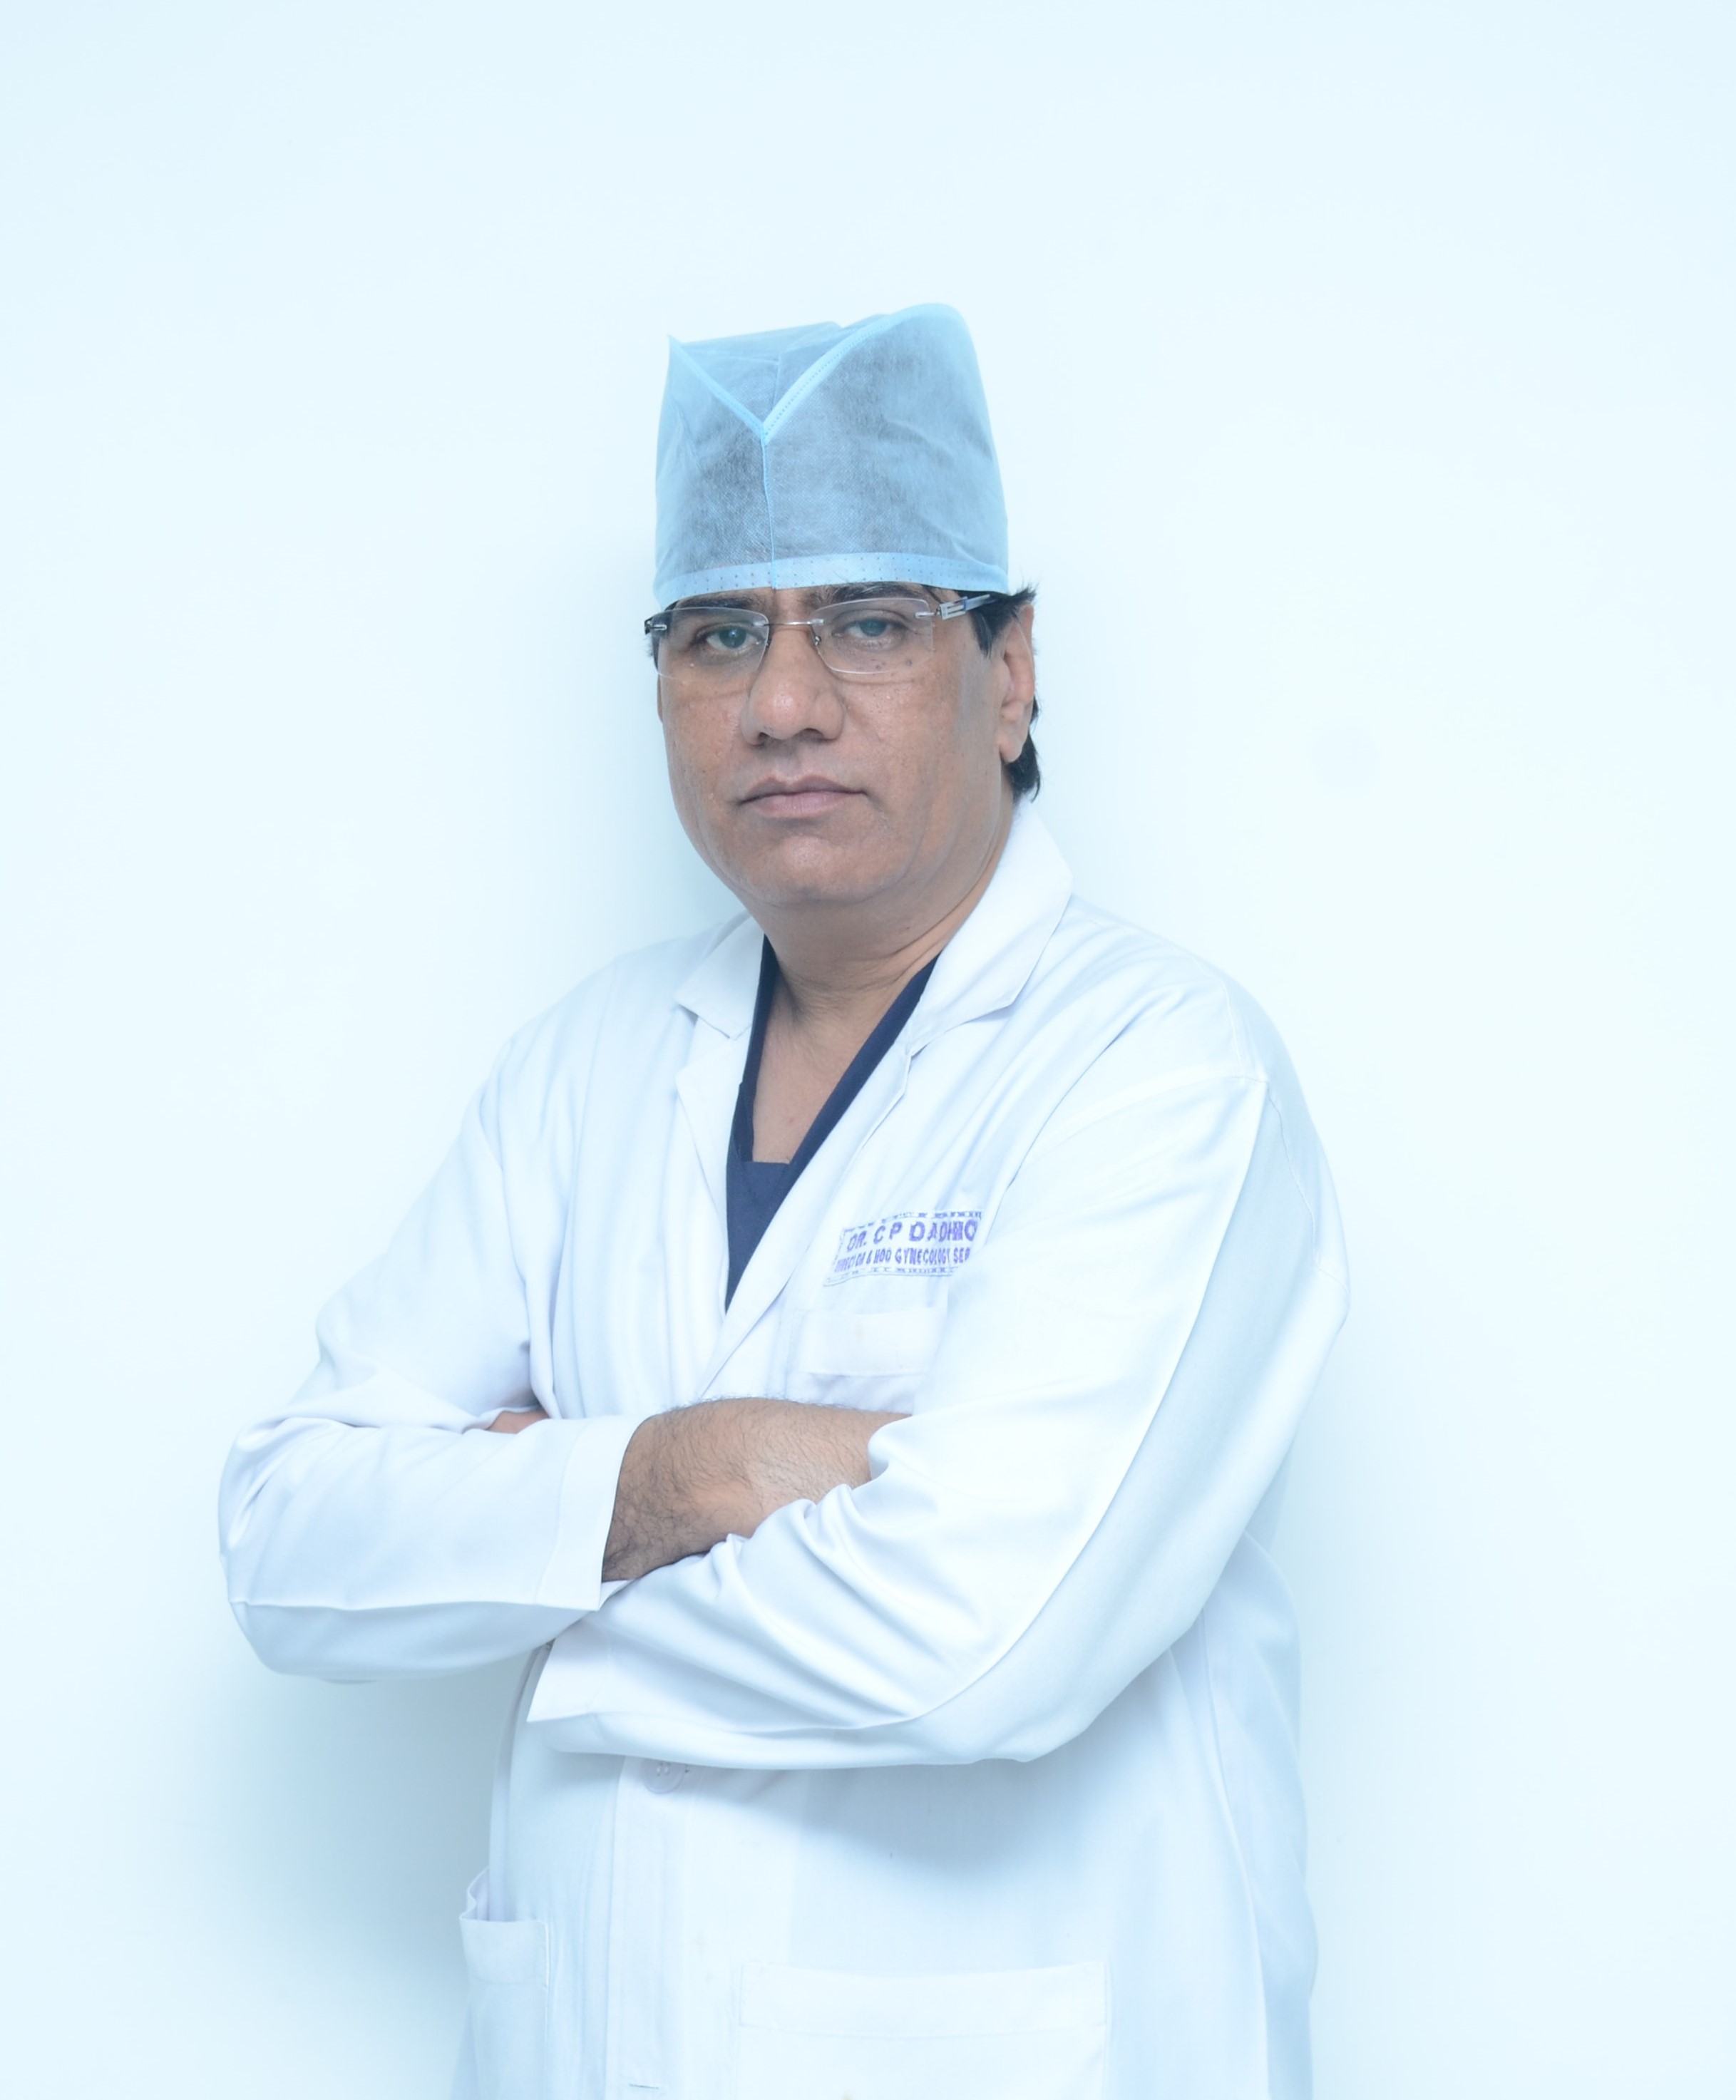 Dr. C. P. Dadhich Obstetrics and Gynaecology Fortis Escorts Hospital, Jaipur